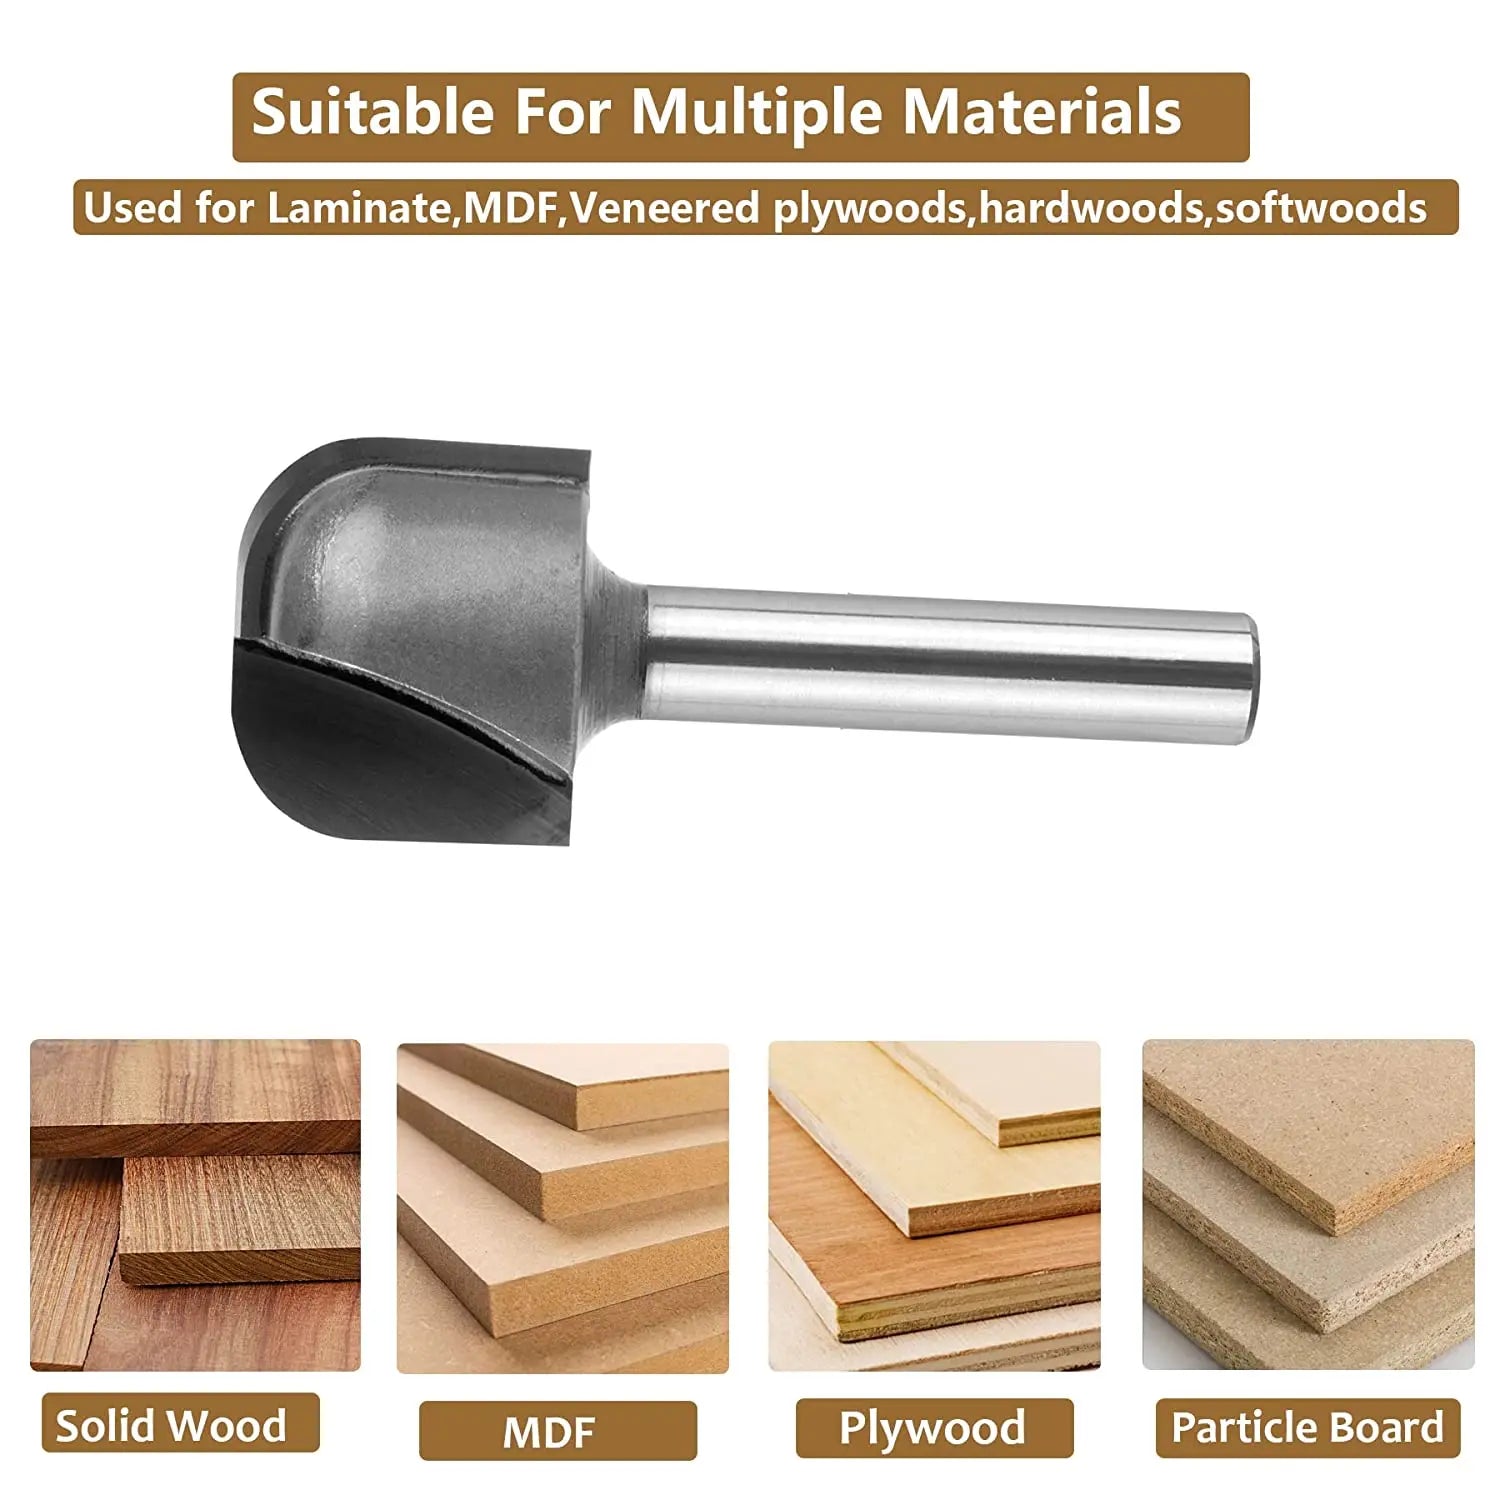 Suitable for multiple materials